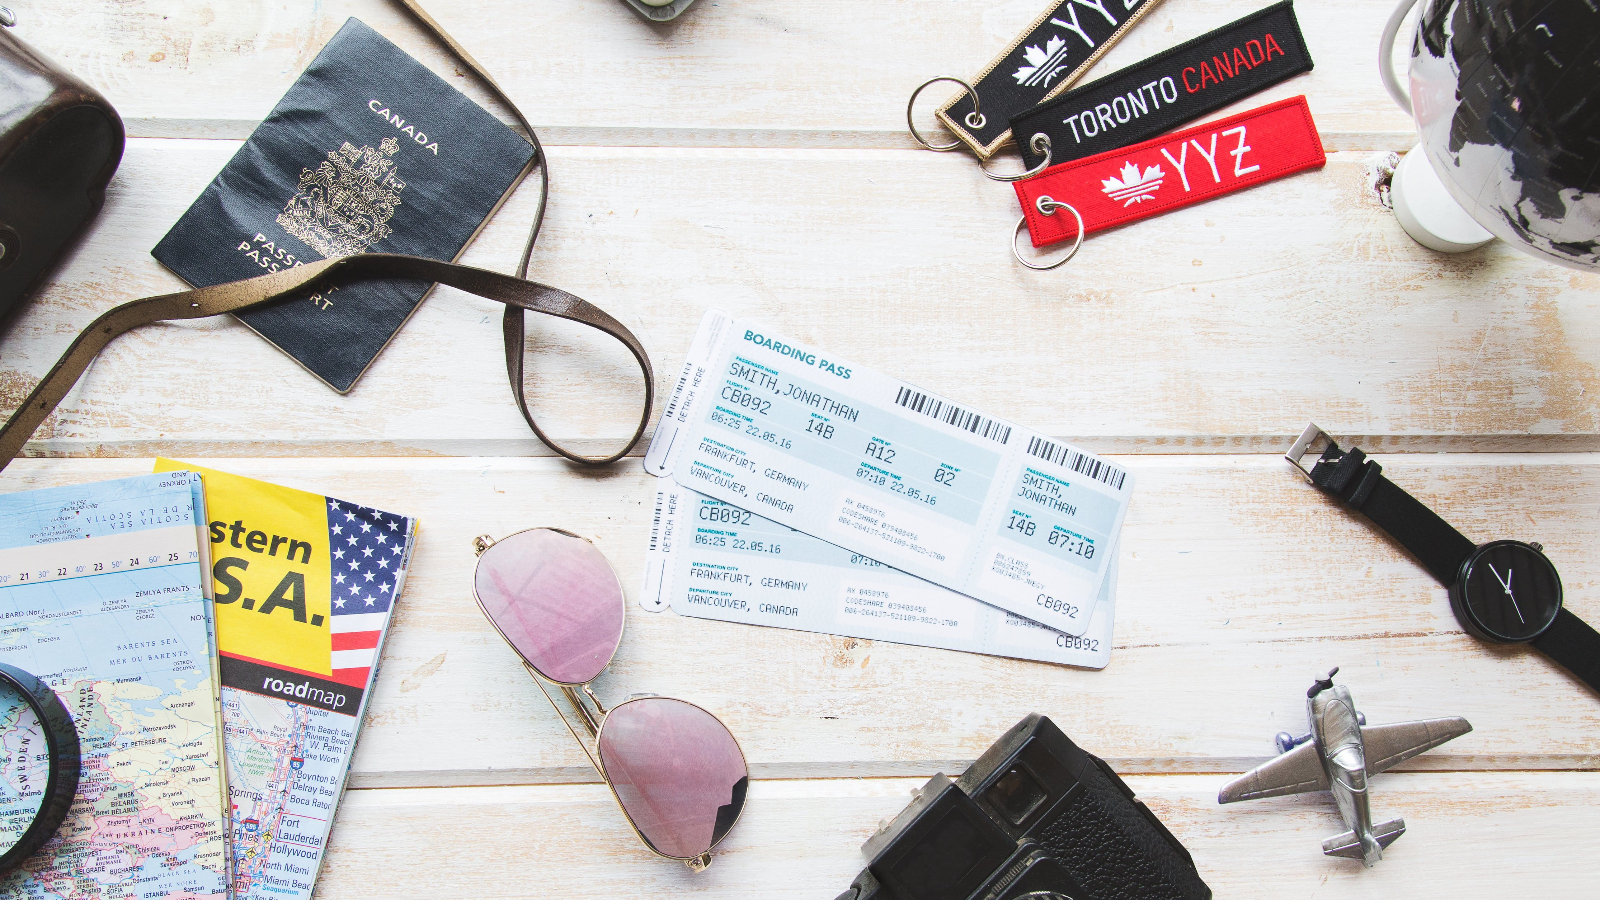 5 Free Boarding Pass Templates for Gifts